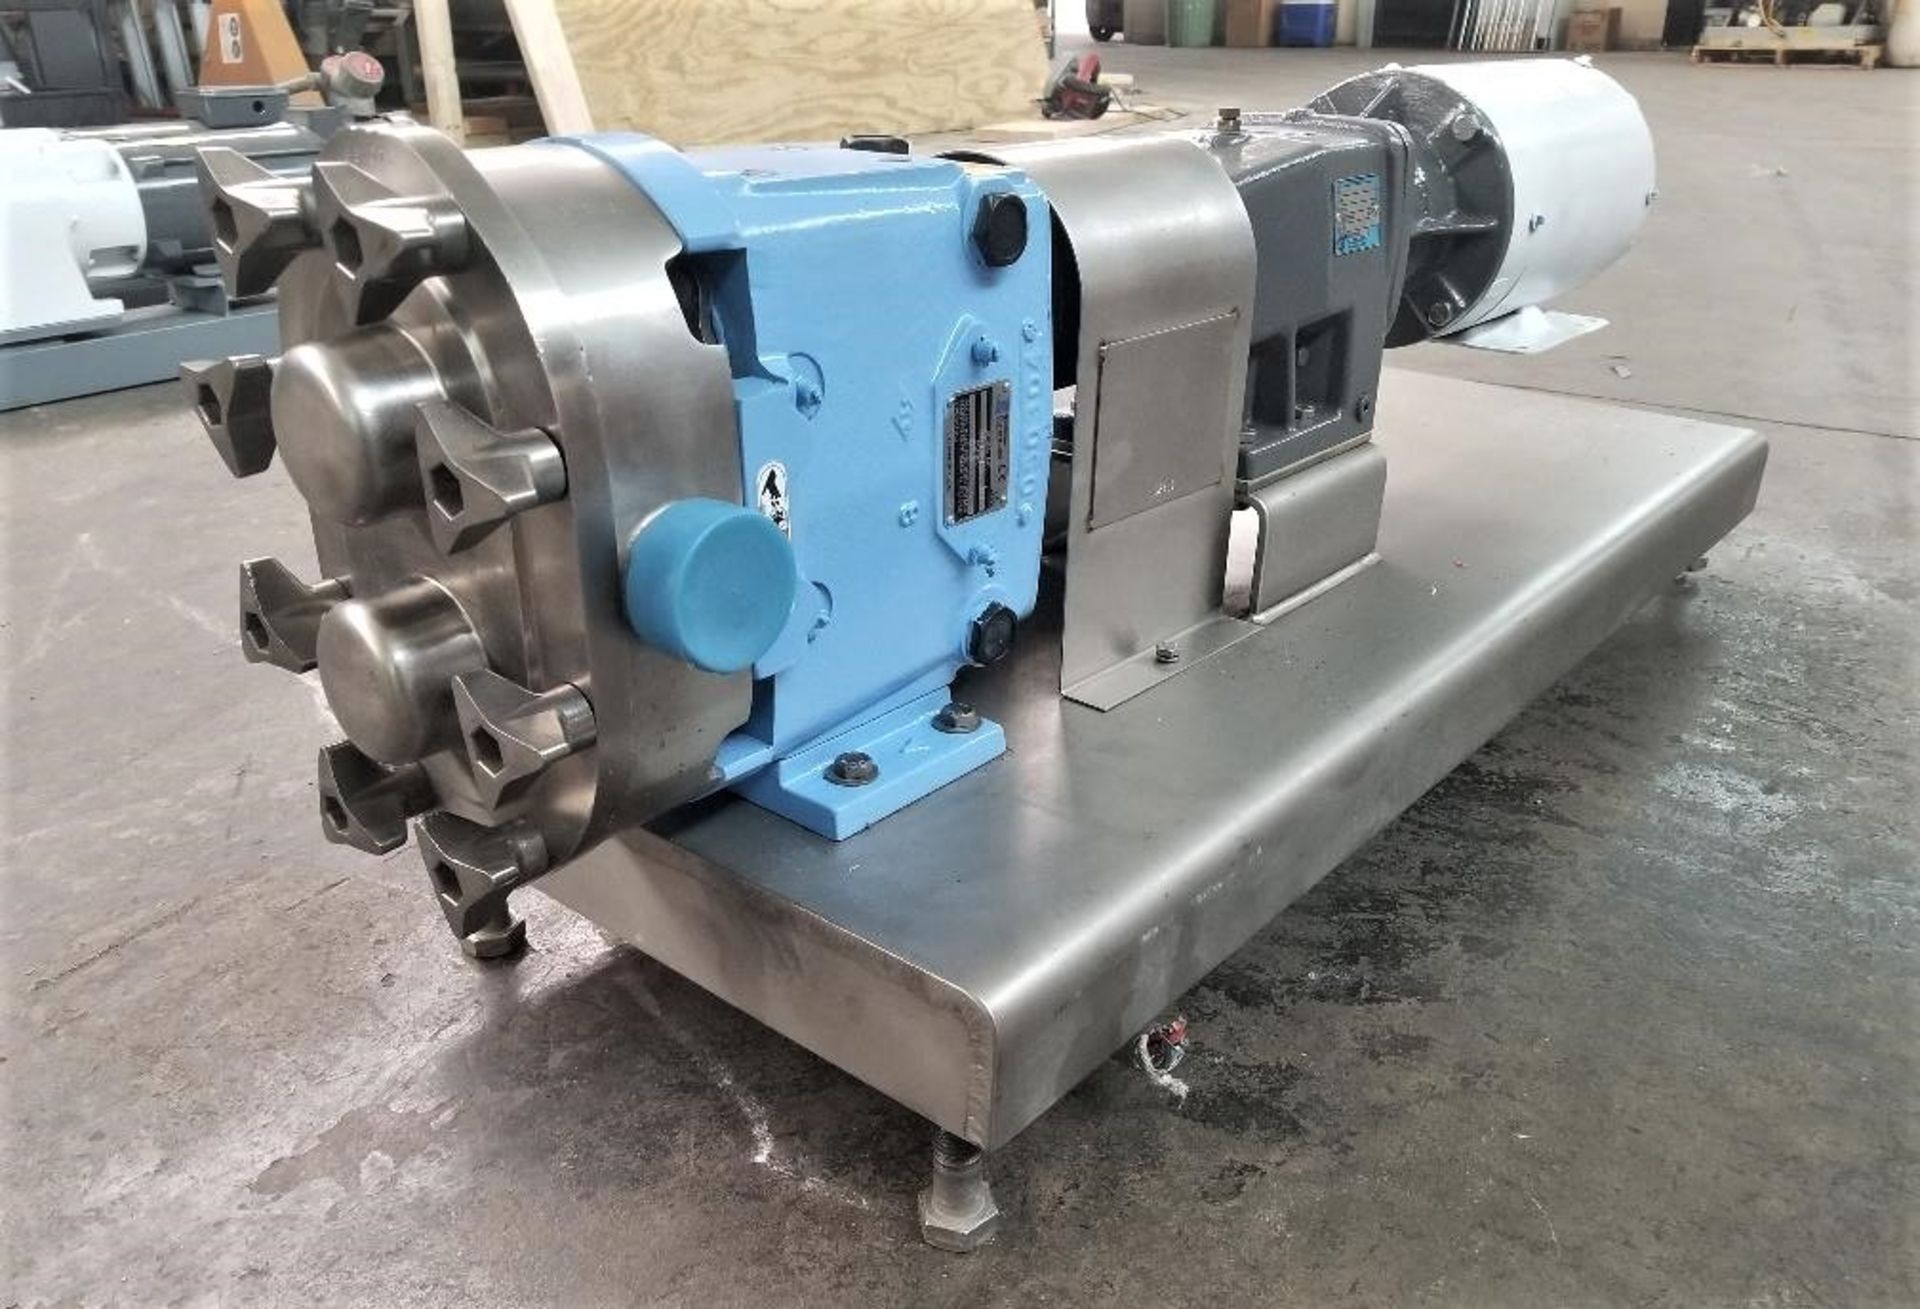 Waukesha S/S Sanitary Positve Displacement Pump, Model 030, S/N 361075 04. This Unit was just